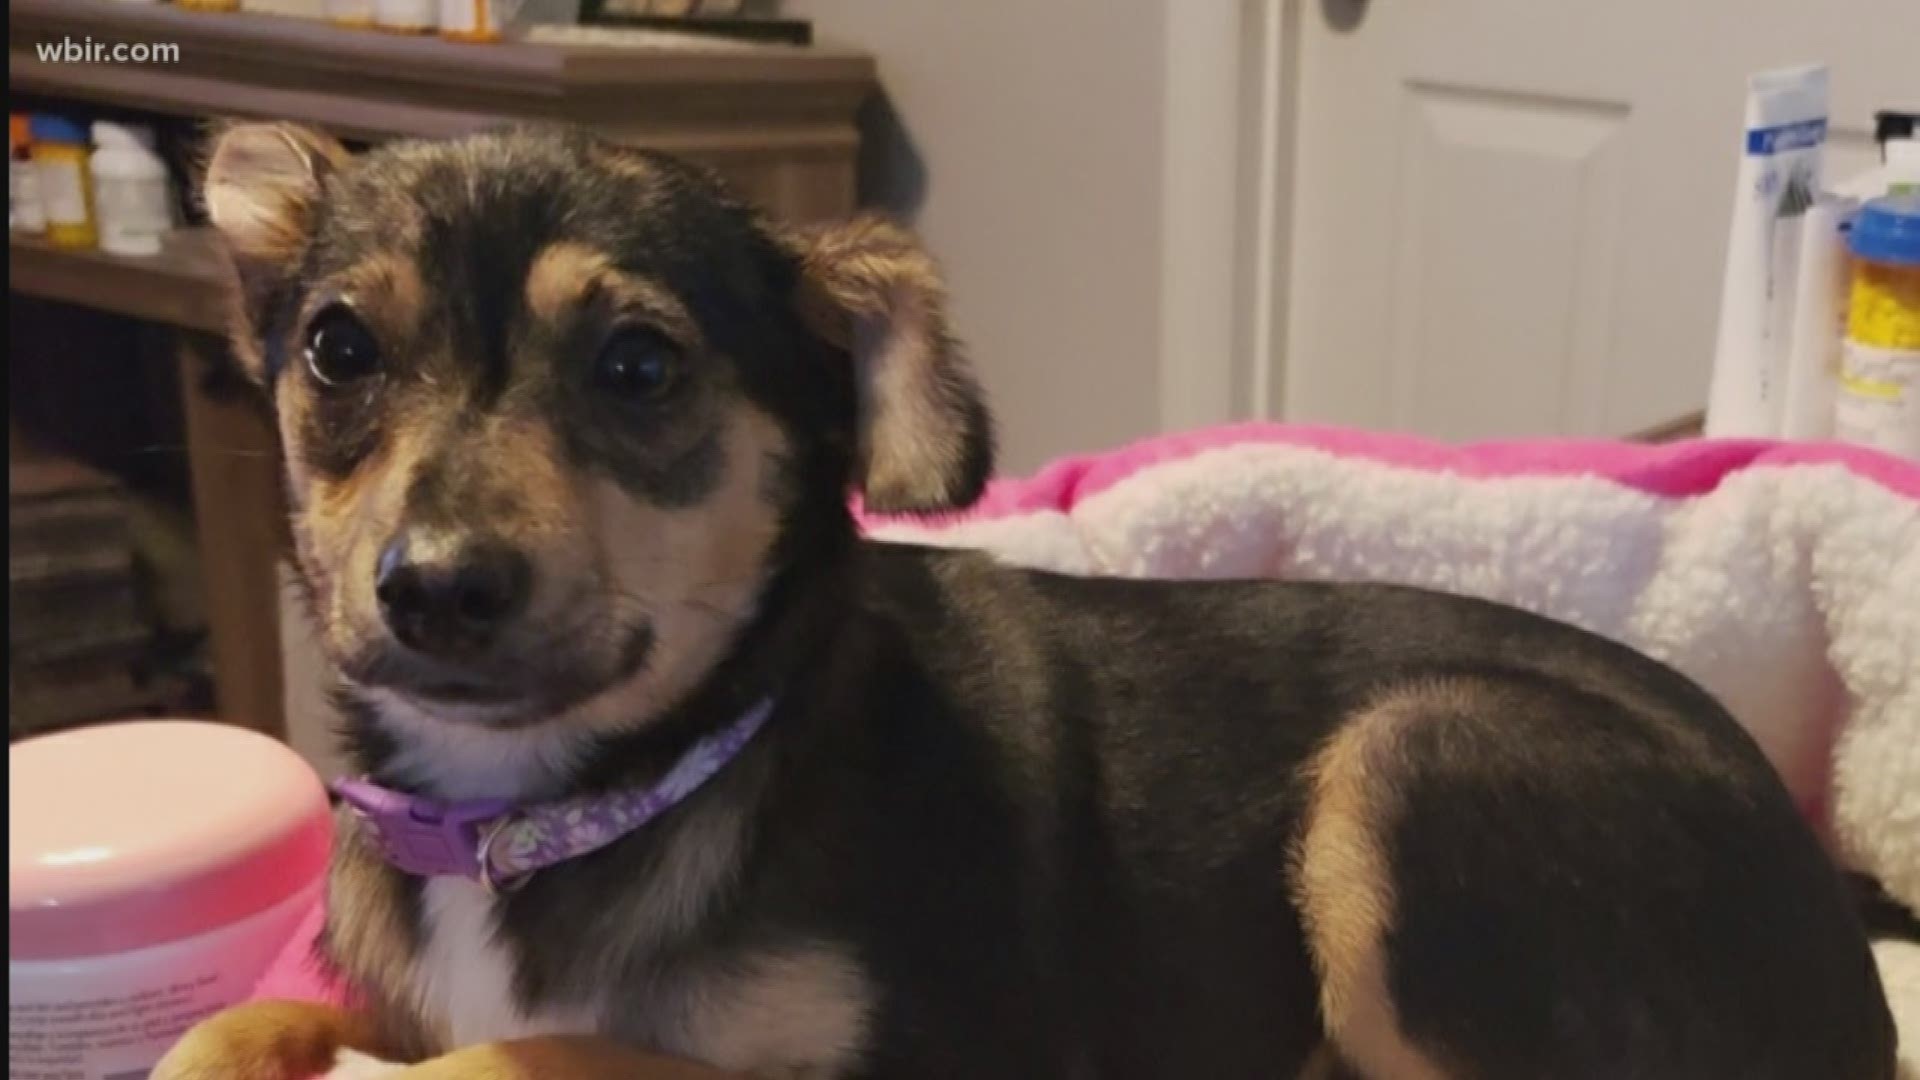 A puppy rescued from Cocke County with severe burns on most of her body is now thriving in her new Knoxville home.